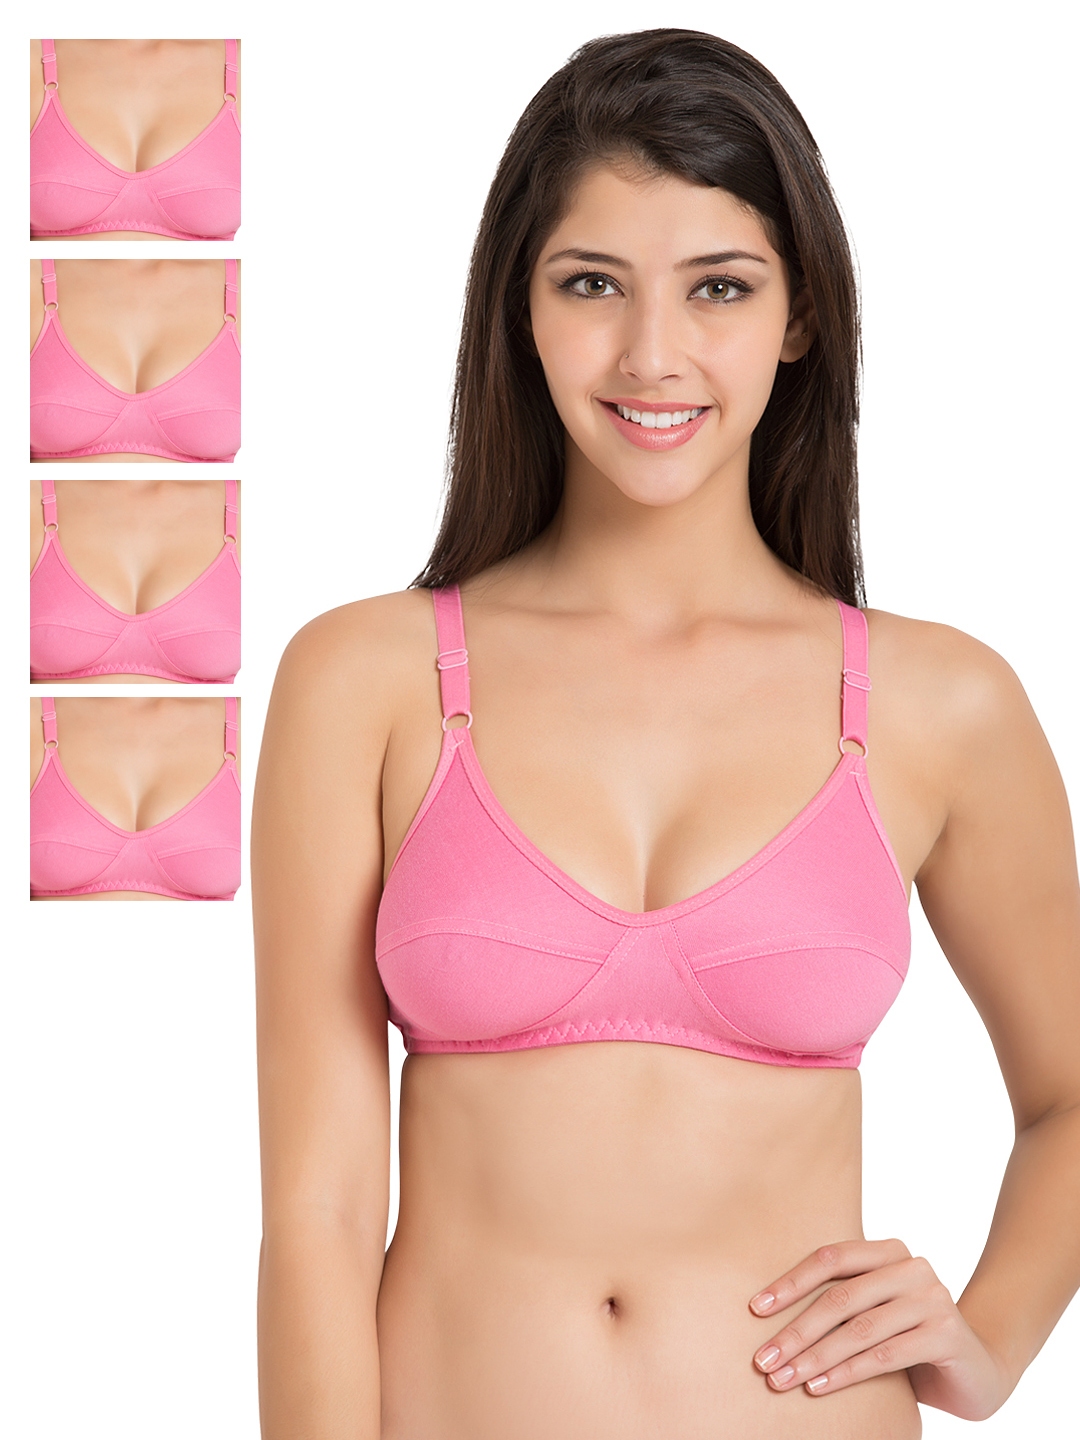 Buy Souminie Pack Of 5 Pink Full Coverage Bras SLY35 - Bra for Women  1364641